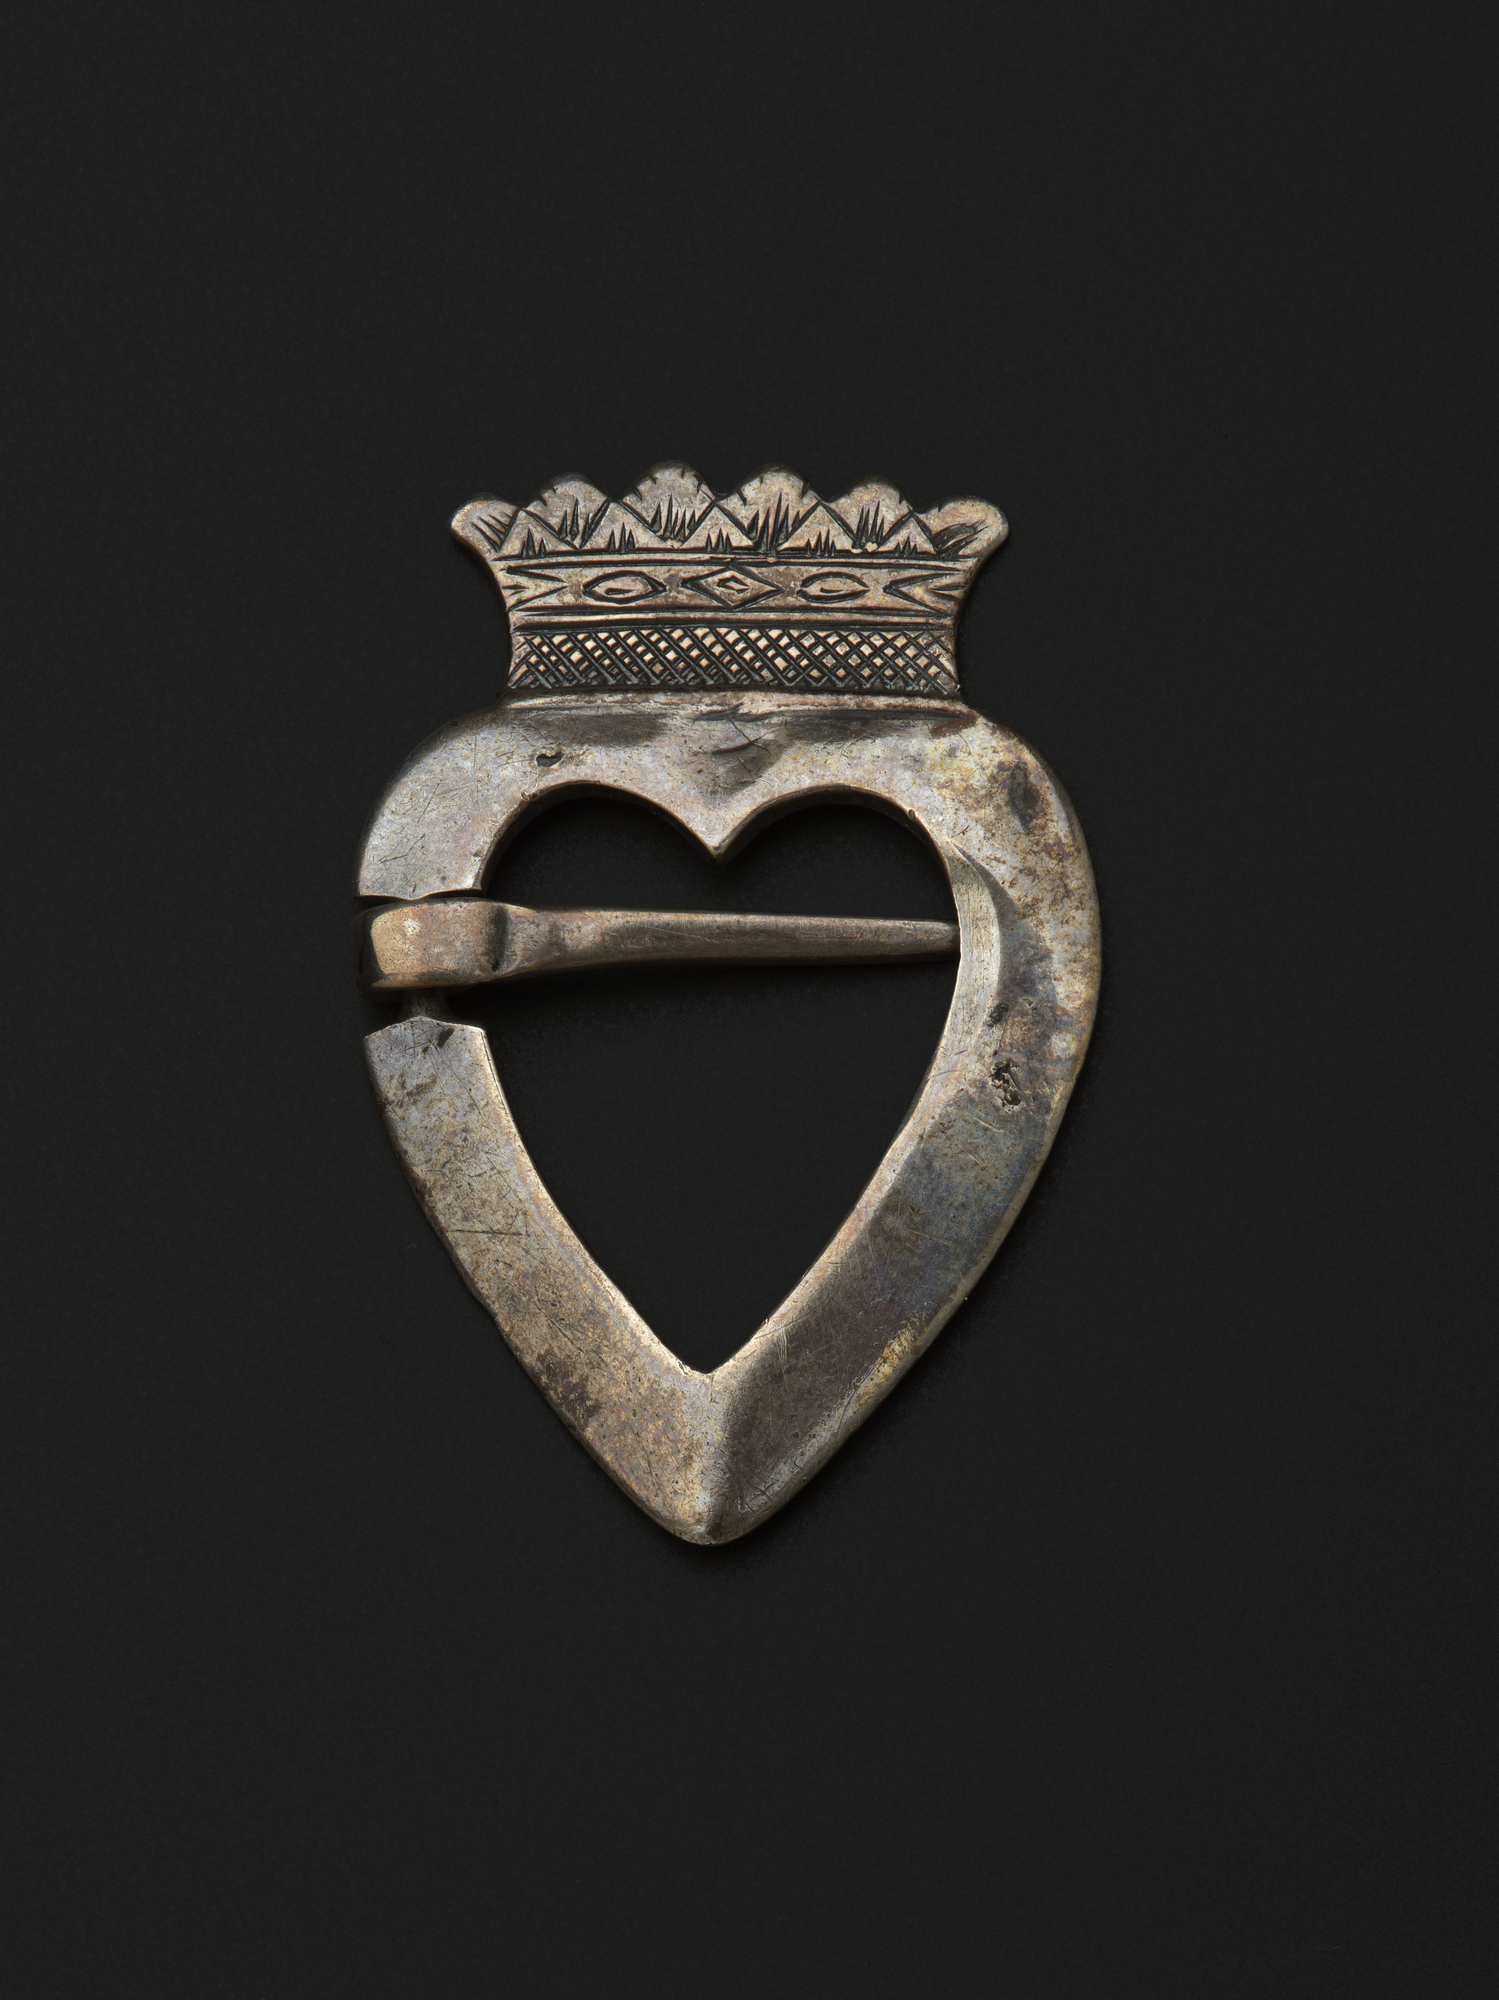 Image of Heart-shaped or Luckenbooth brooch of silver, inscribed on the back with a maker